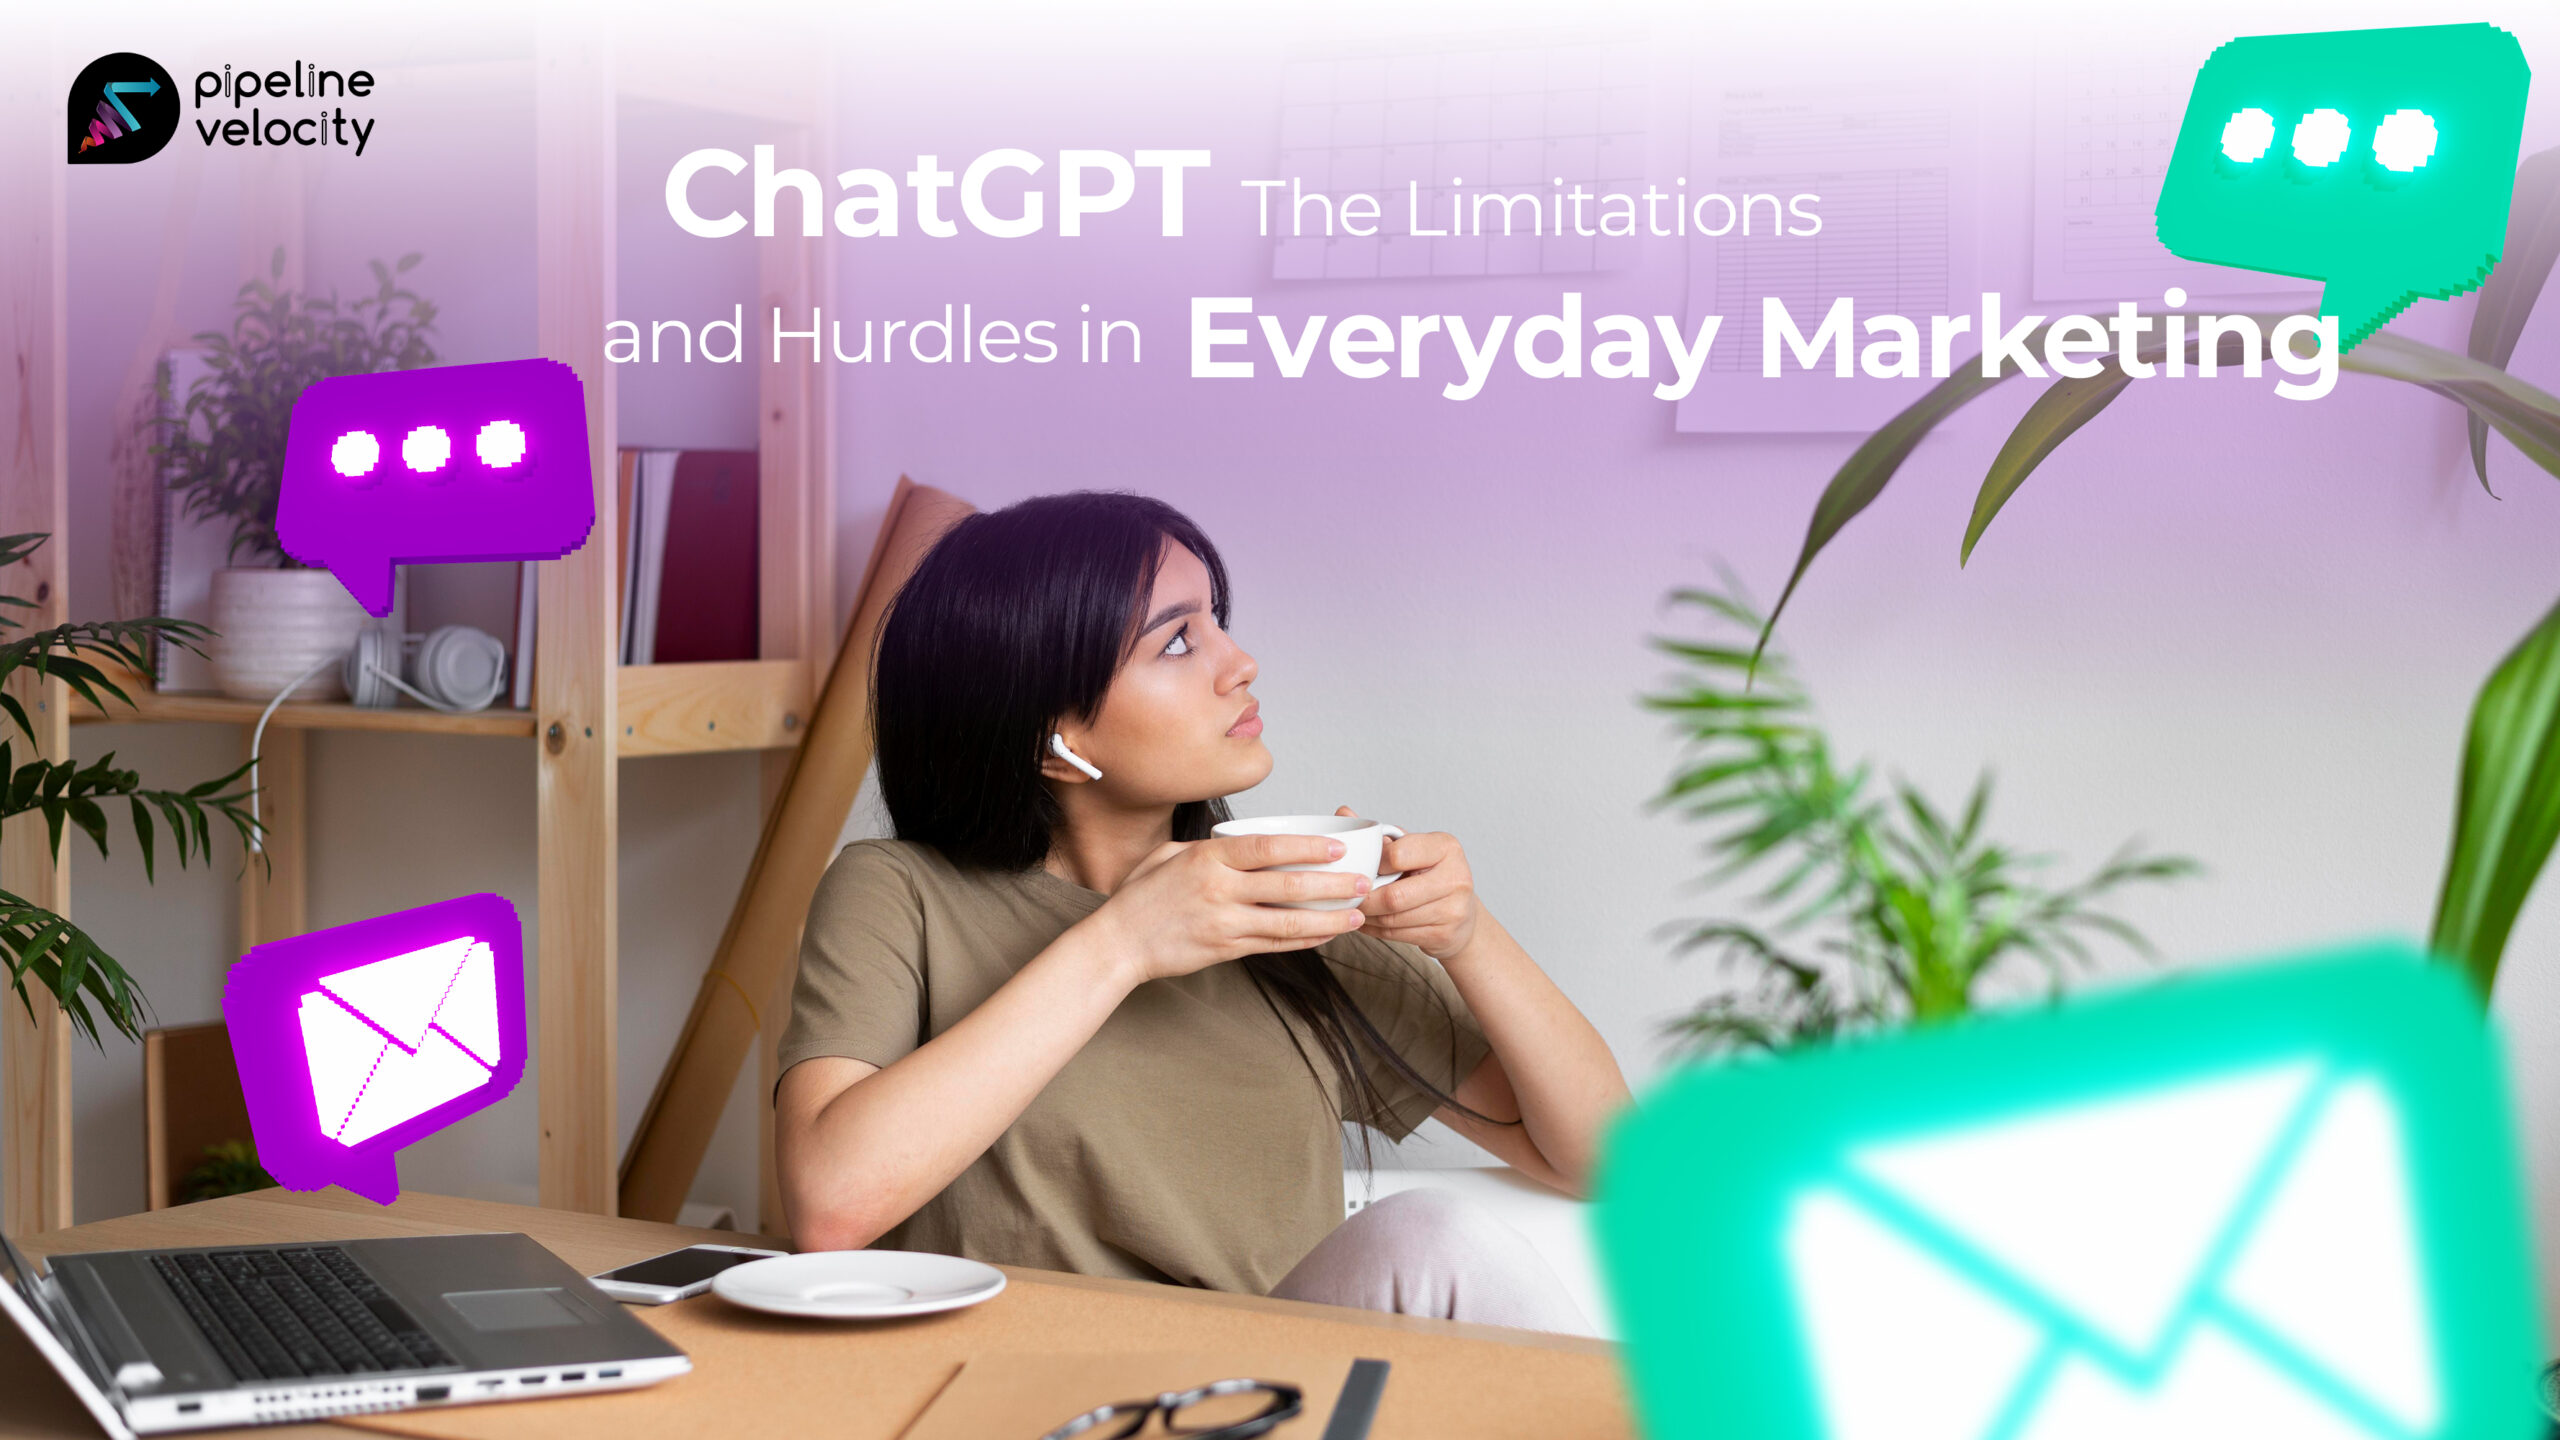 ChatGPT: The Limitations and Hurdles in Everyday Marketing